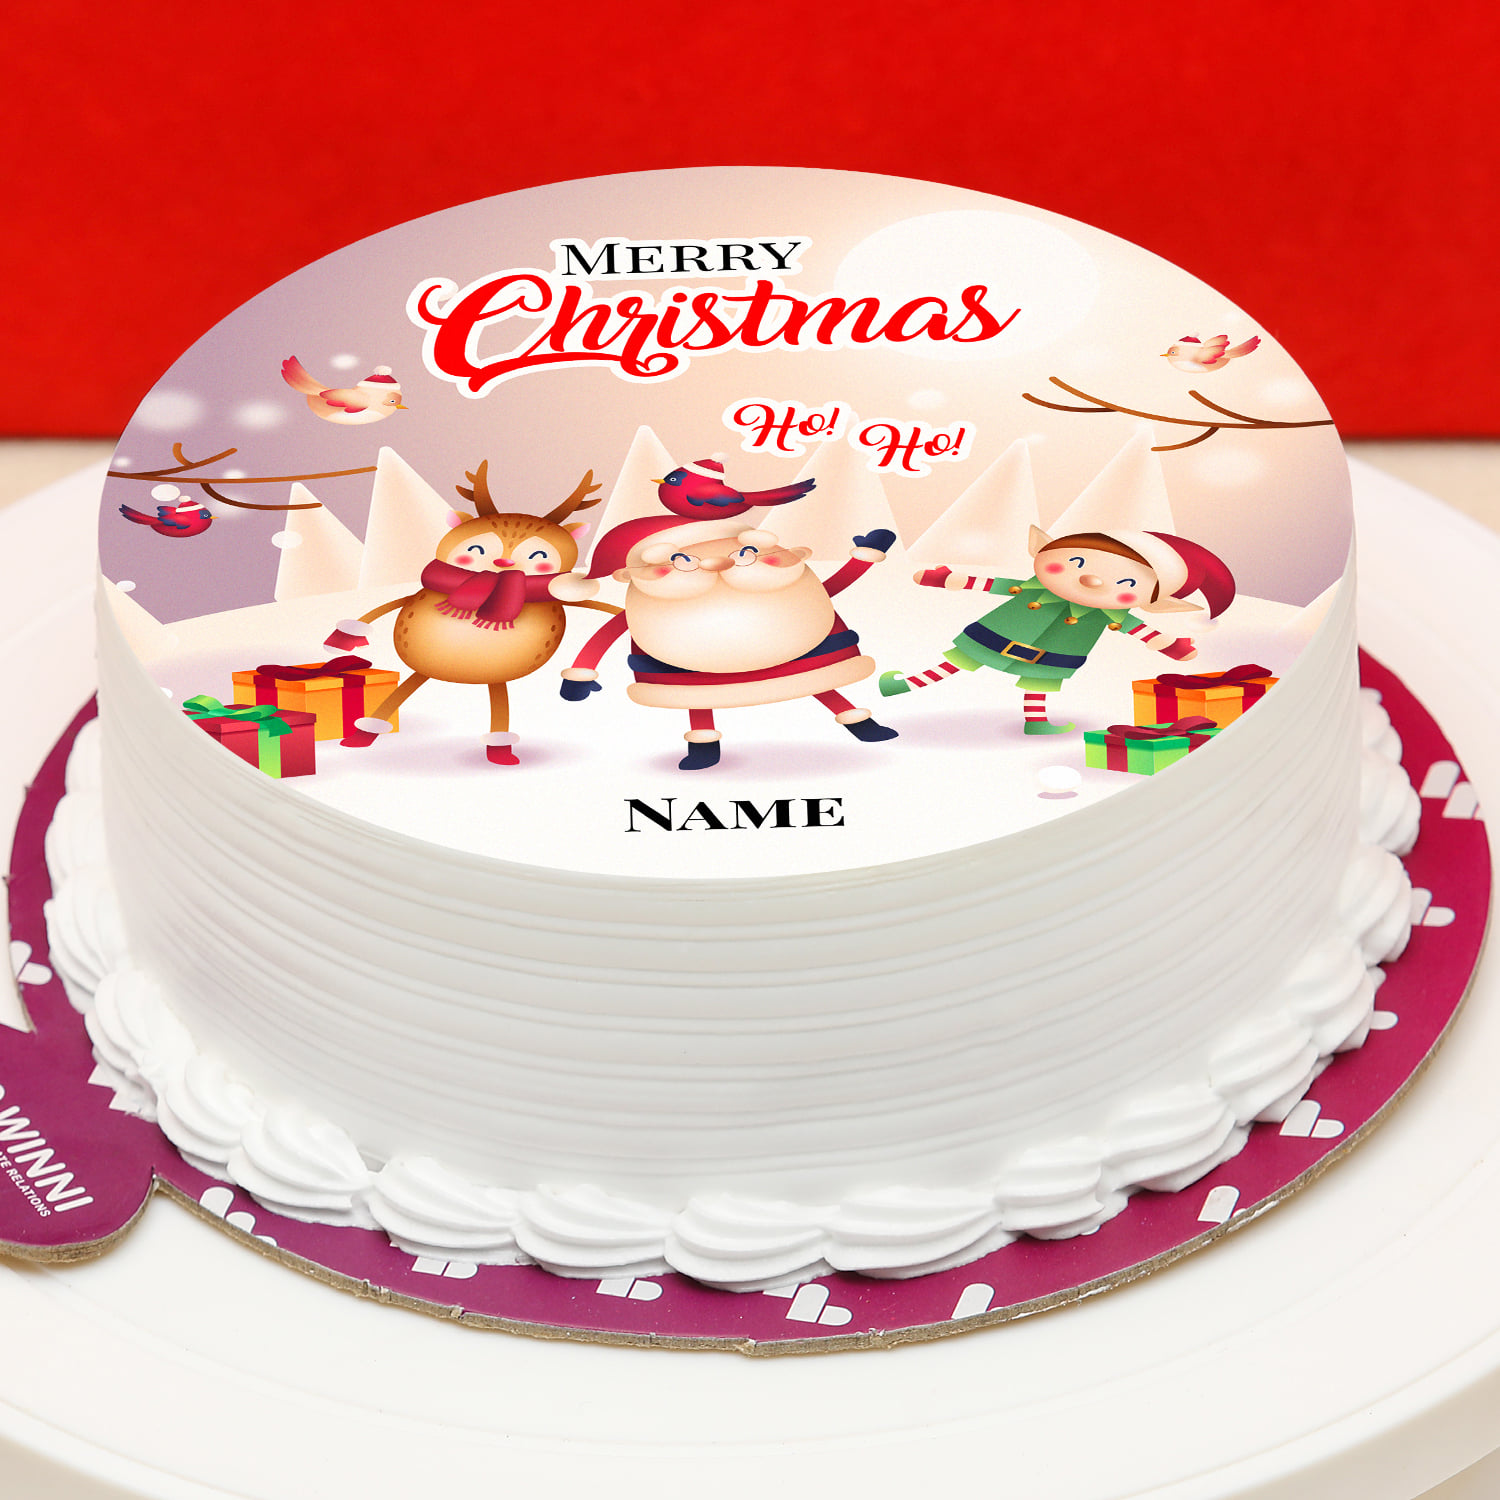 Christmas Cake Toppers Resin Santa Claus Cake Decor Xmas Small House  Cupcake Dec Merry Christmas Decor For Home Happy new Year - AliExpress